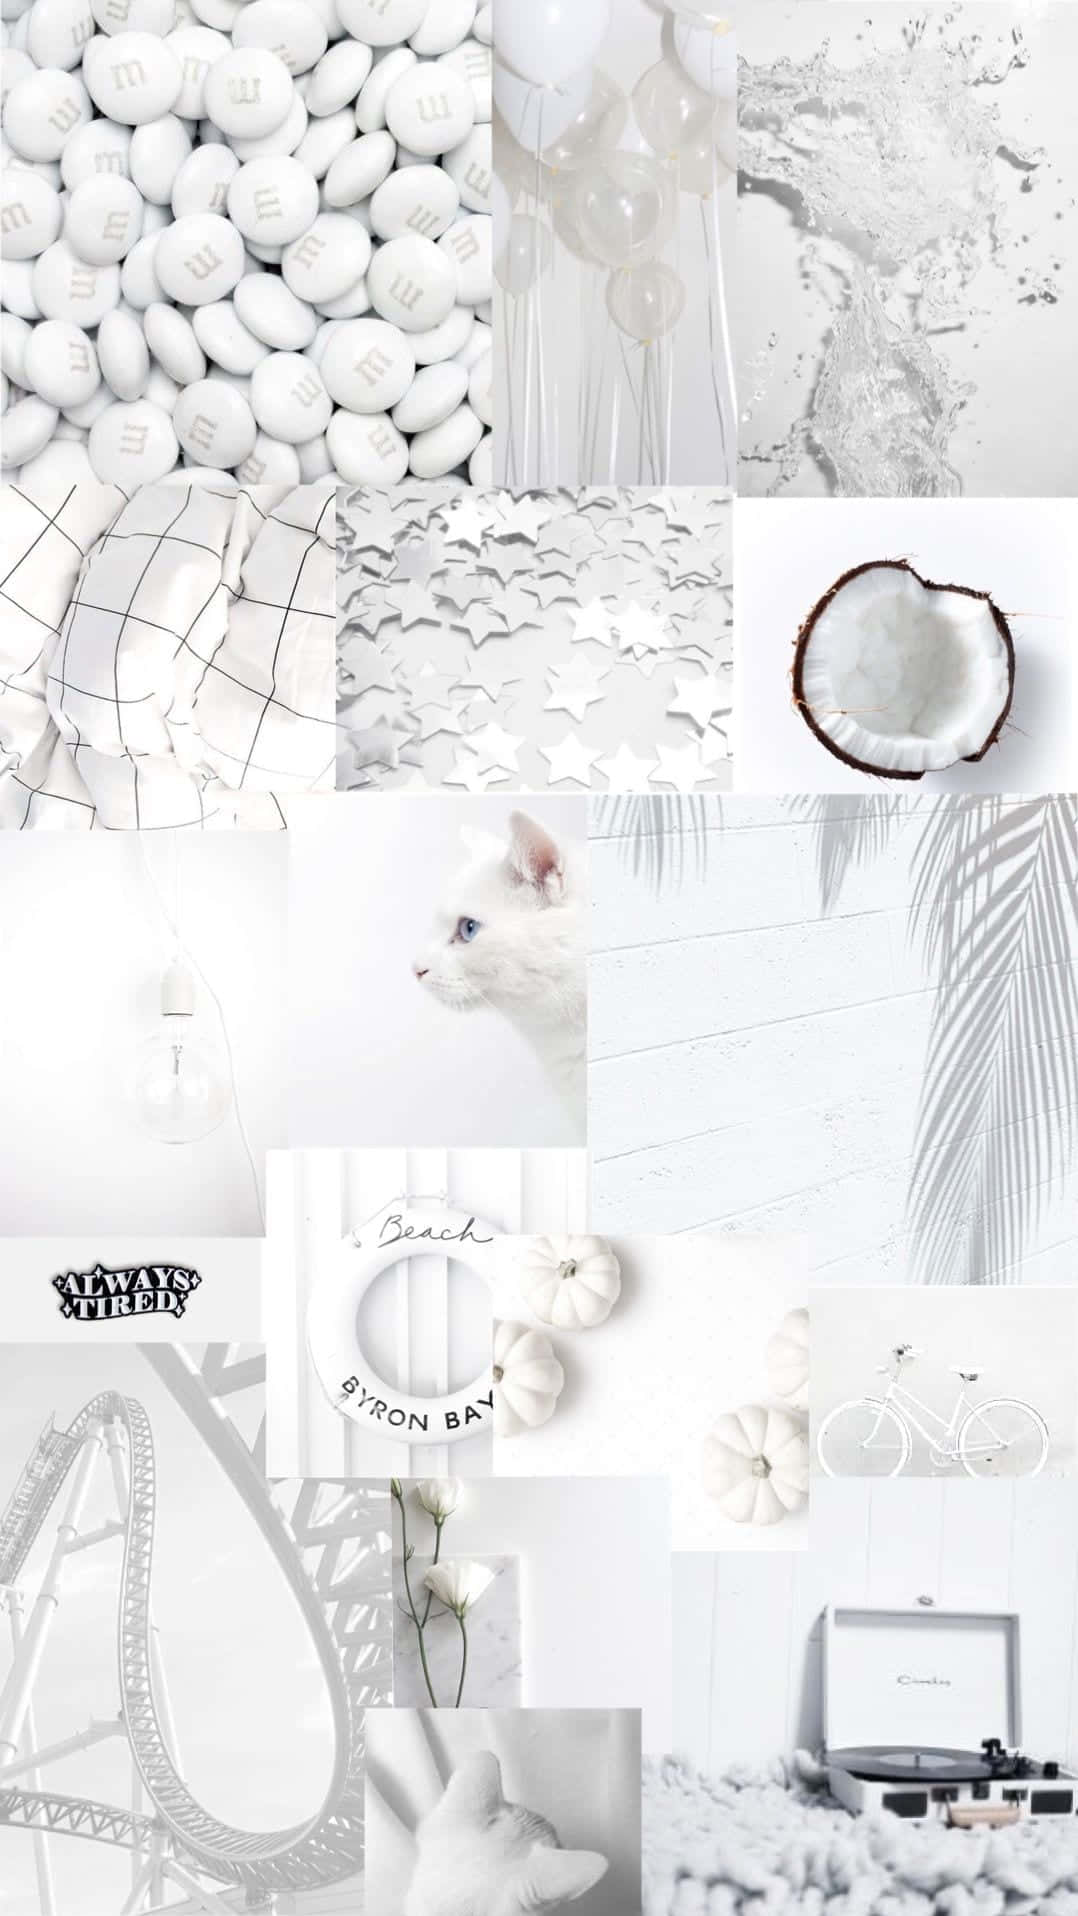 An Abstraction of White Aesthetic Elements Wallpaper